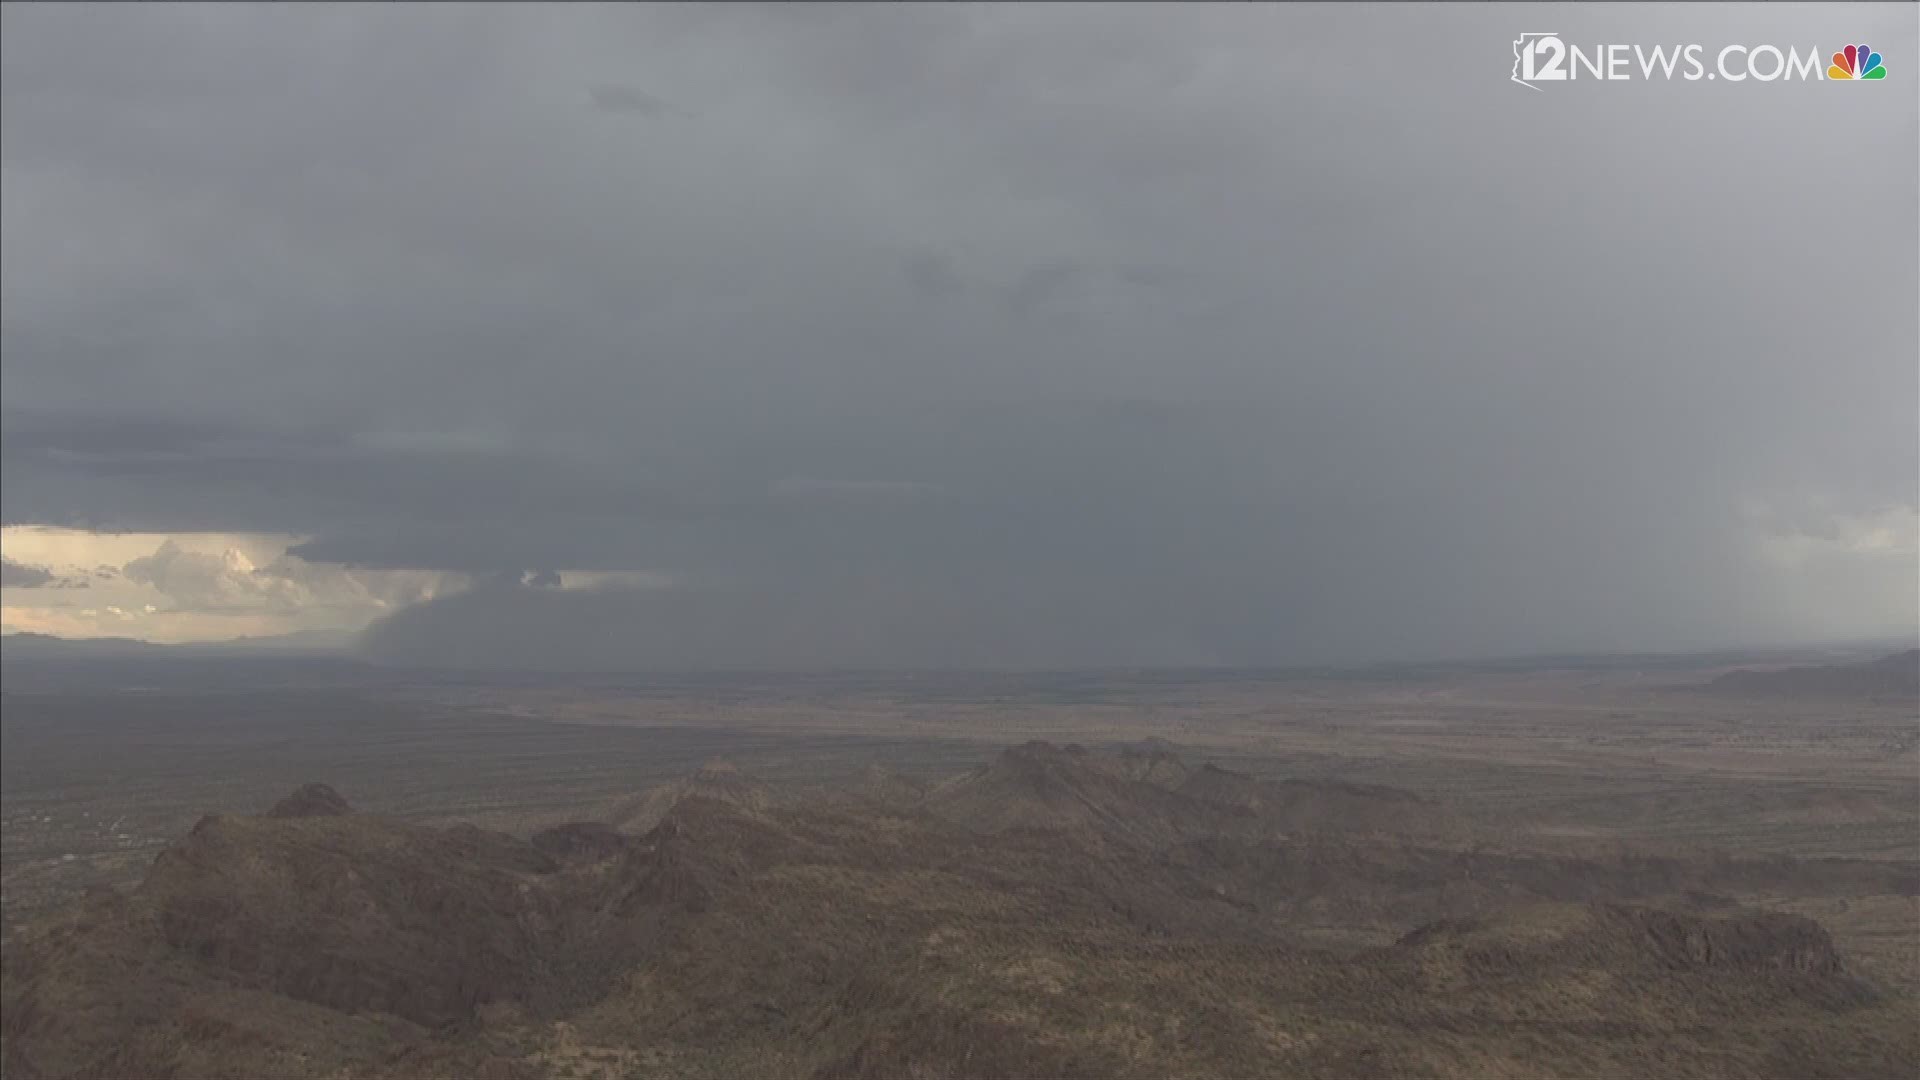 Video from the 12 News helicopter Sky 12 shows a wall of dust in the Arizona desert Sept. 16, 2019. These walls of dust, sometimes called haboobs, are common during Arizona's rainy monsoon season.